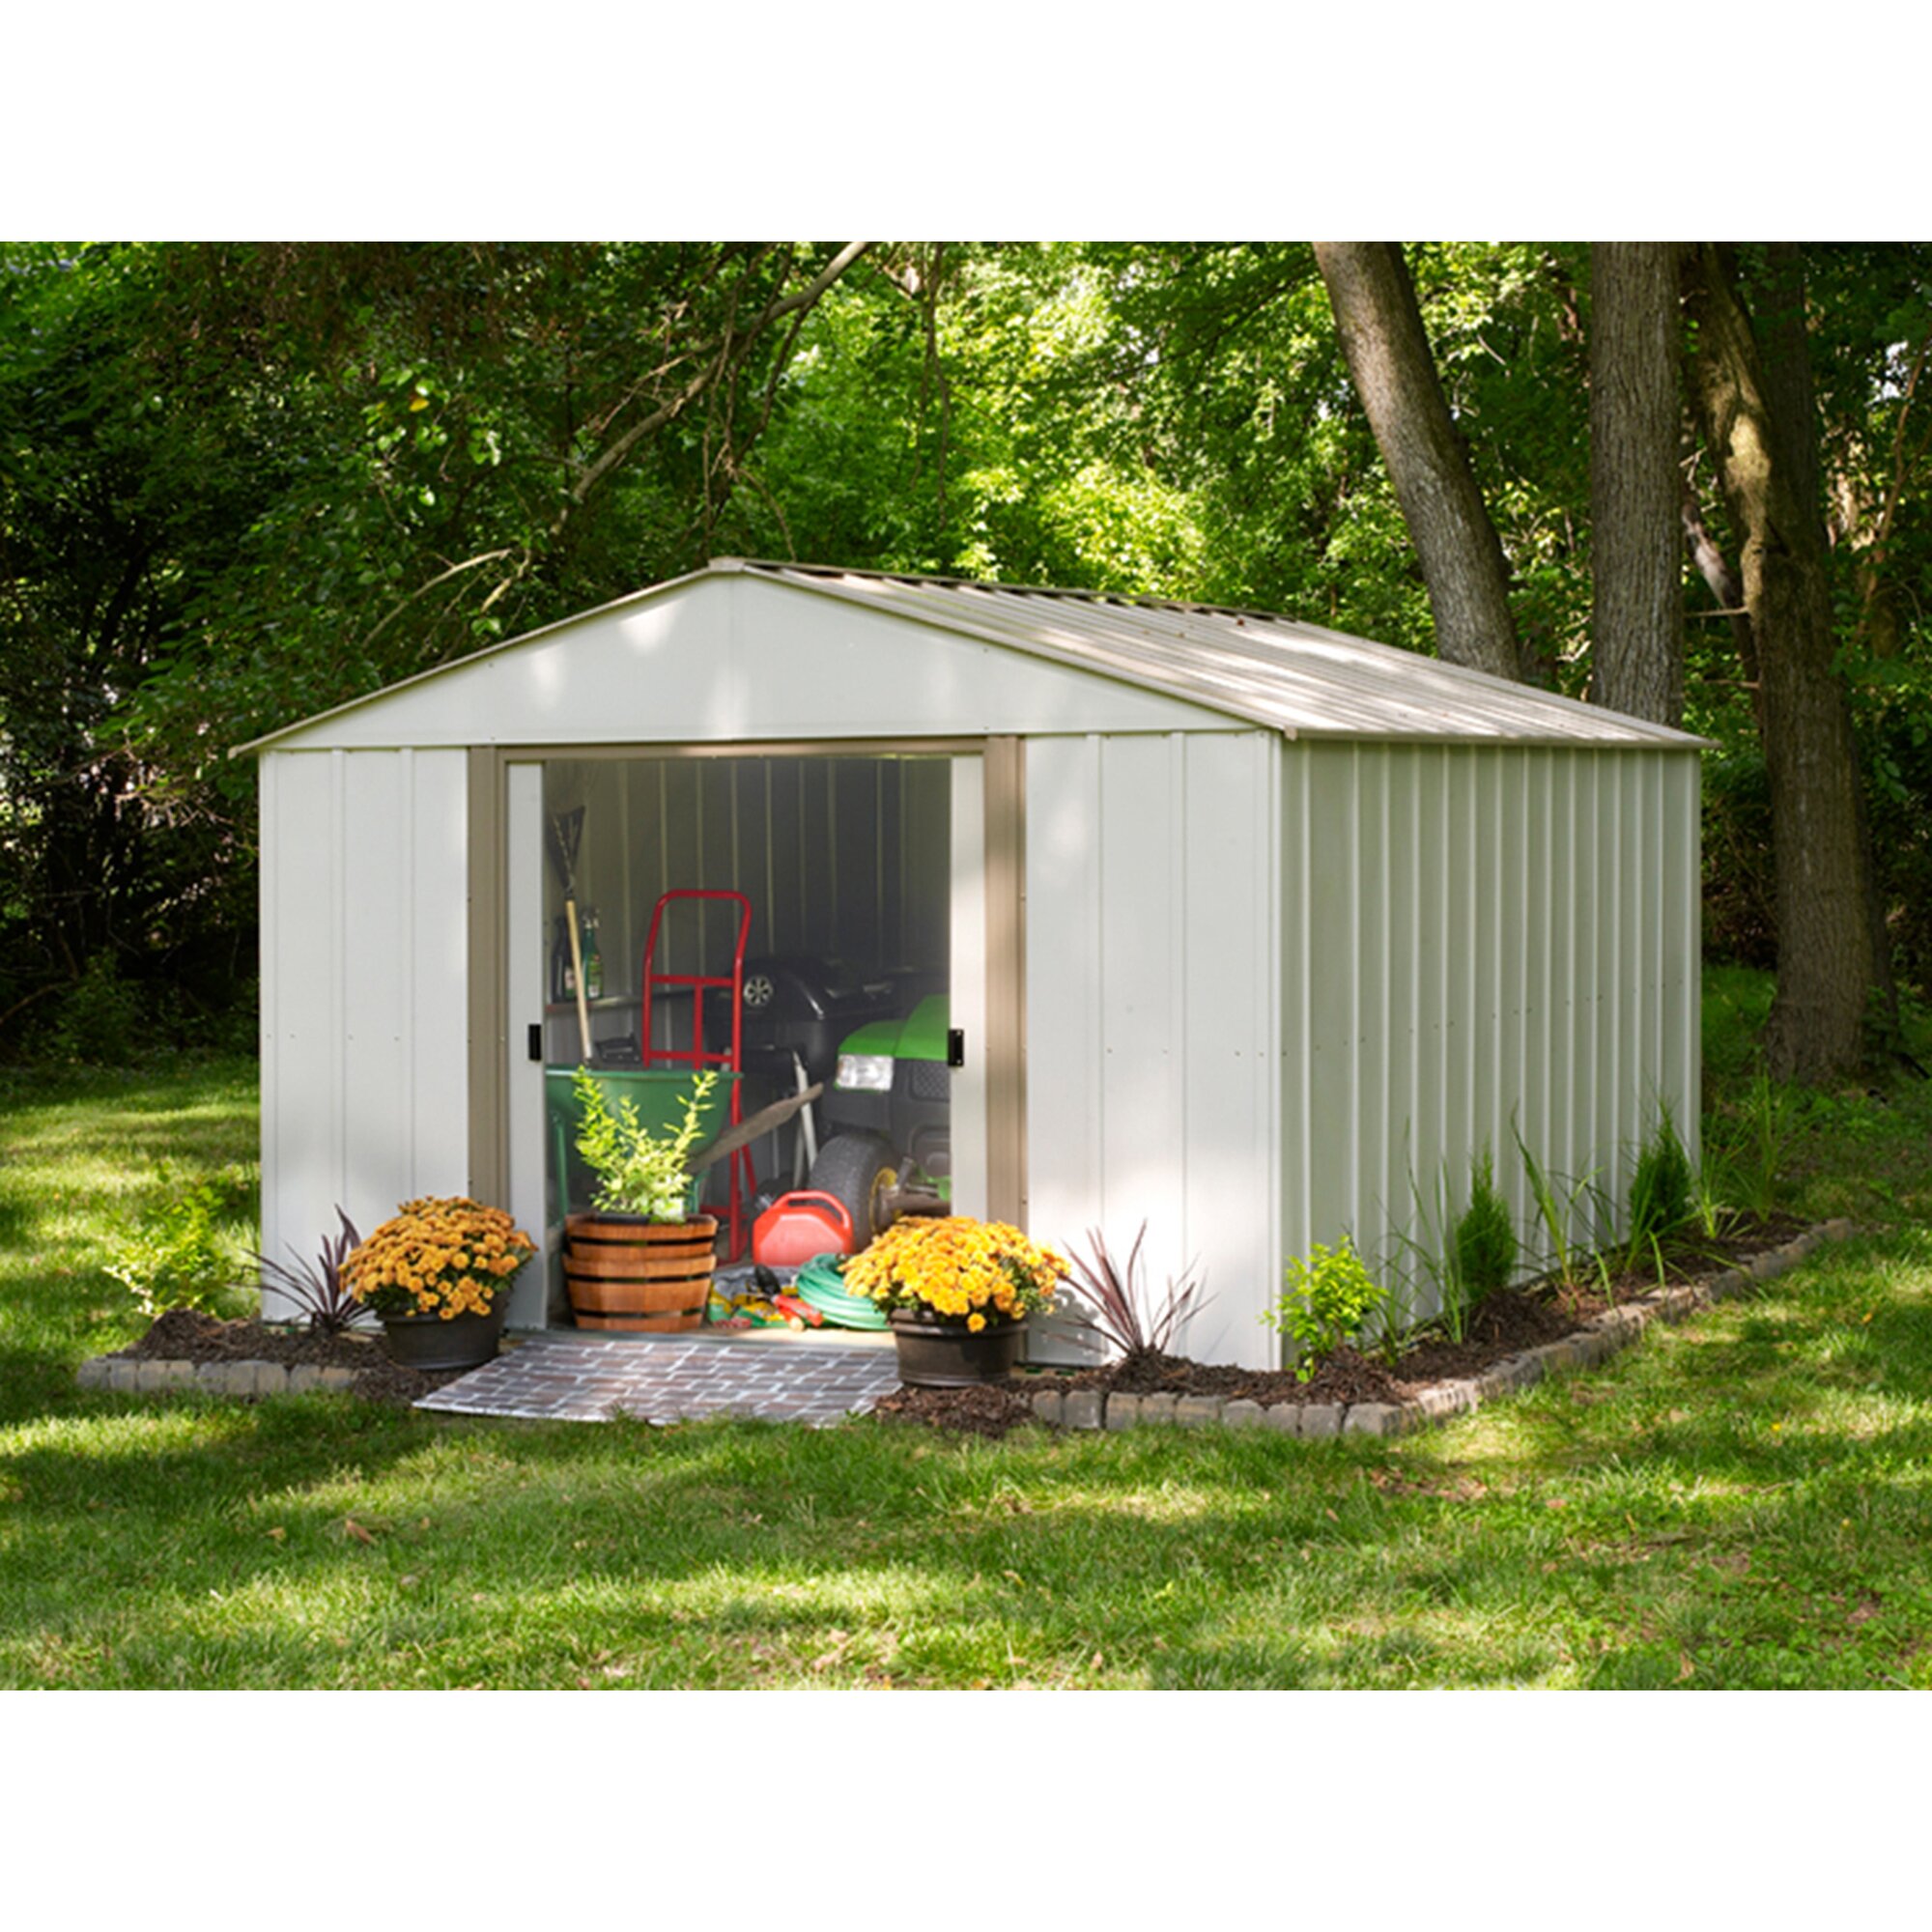 8 ft. w x 8 ft. d american wood storage shed wayfair